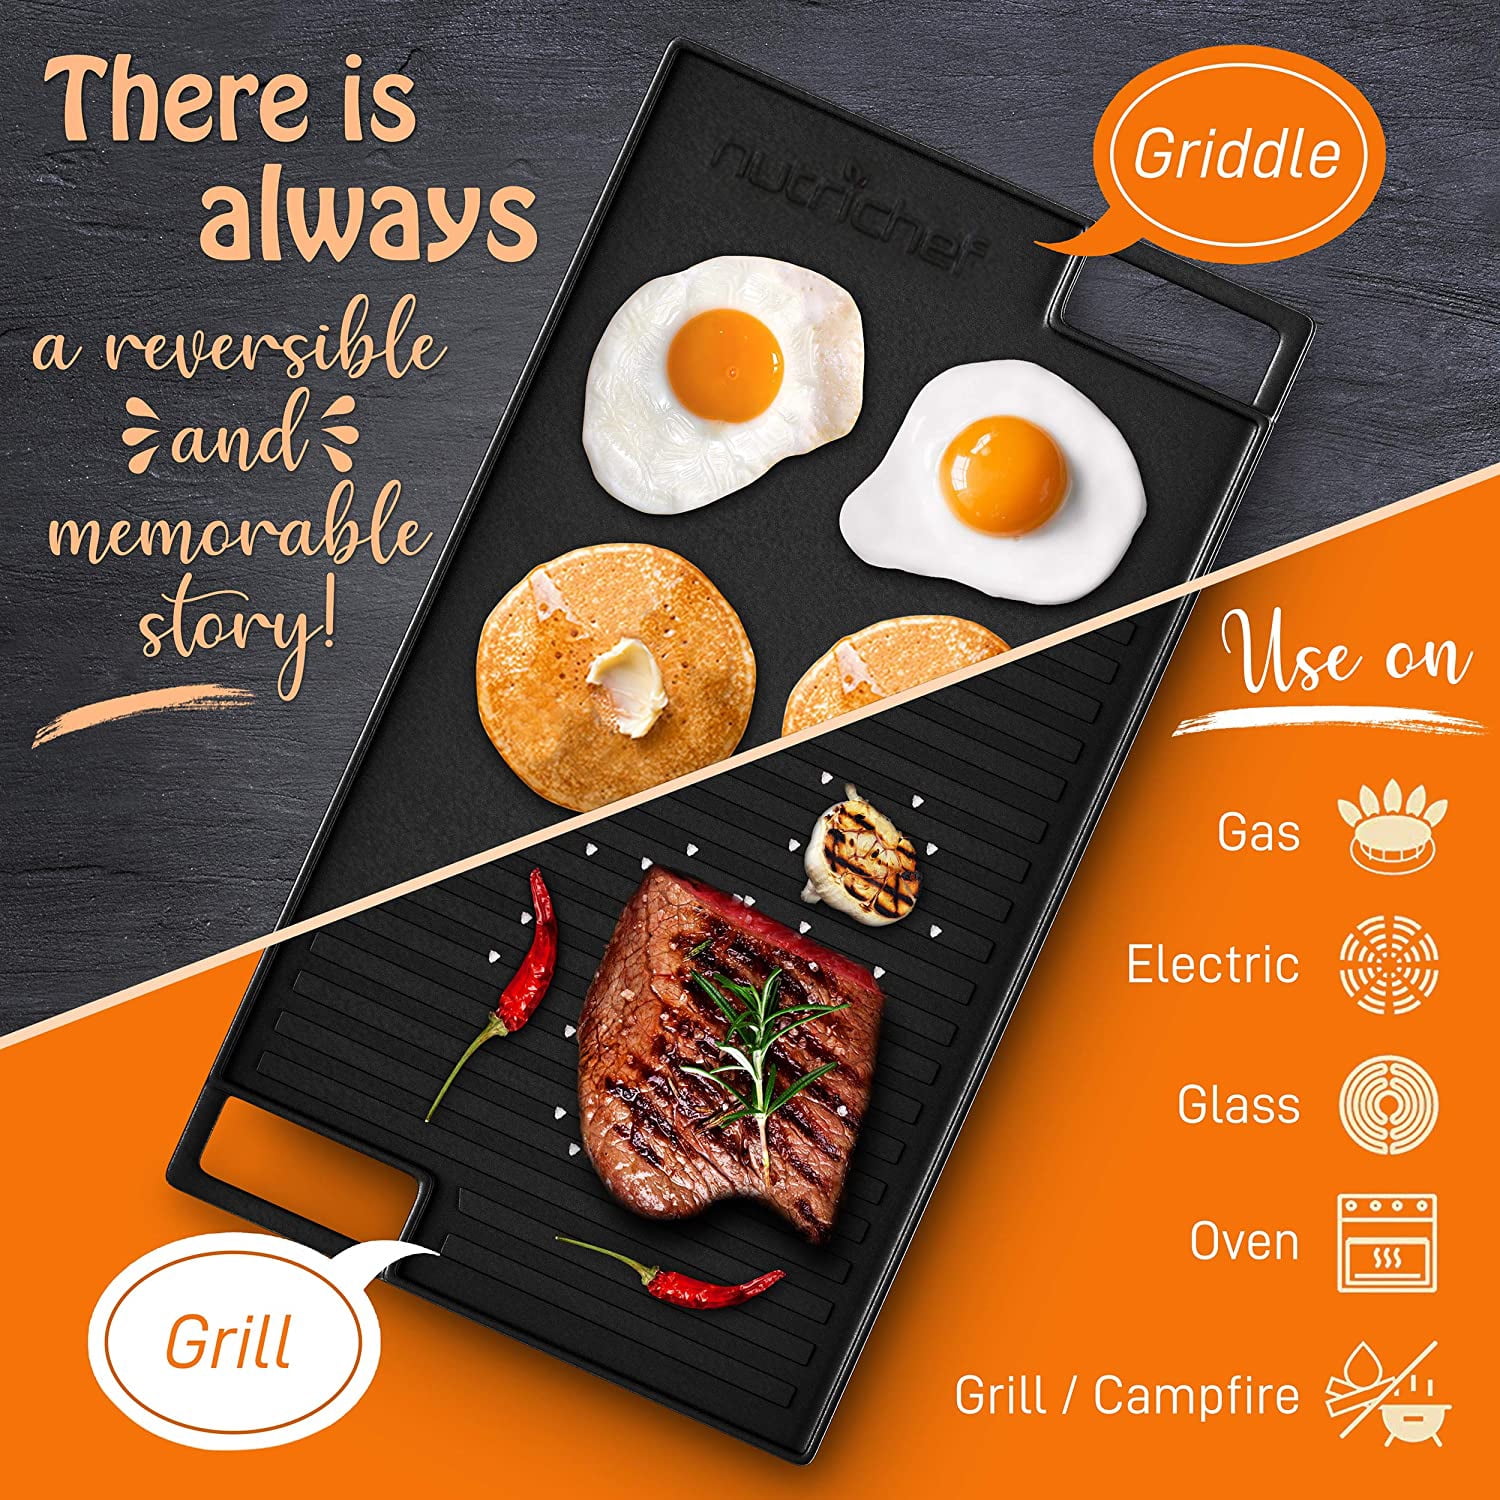 NutriChef Cast Iron Reversible Grill Plate - 18 Inch Flat Cast Iron Skillet  Griddle Pan For Stove Top, Gas Range Grilling Pan w/ Silicone Oven Mitt For  Electric Stovetop, Ceramic, Induction.